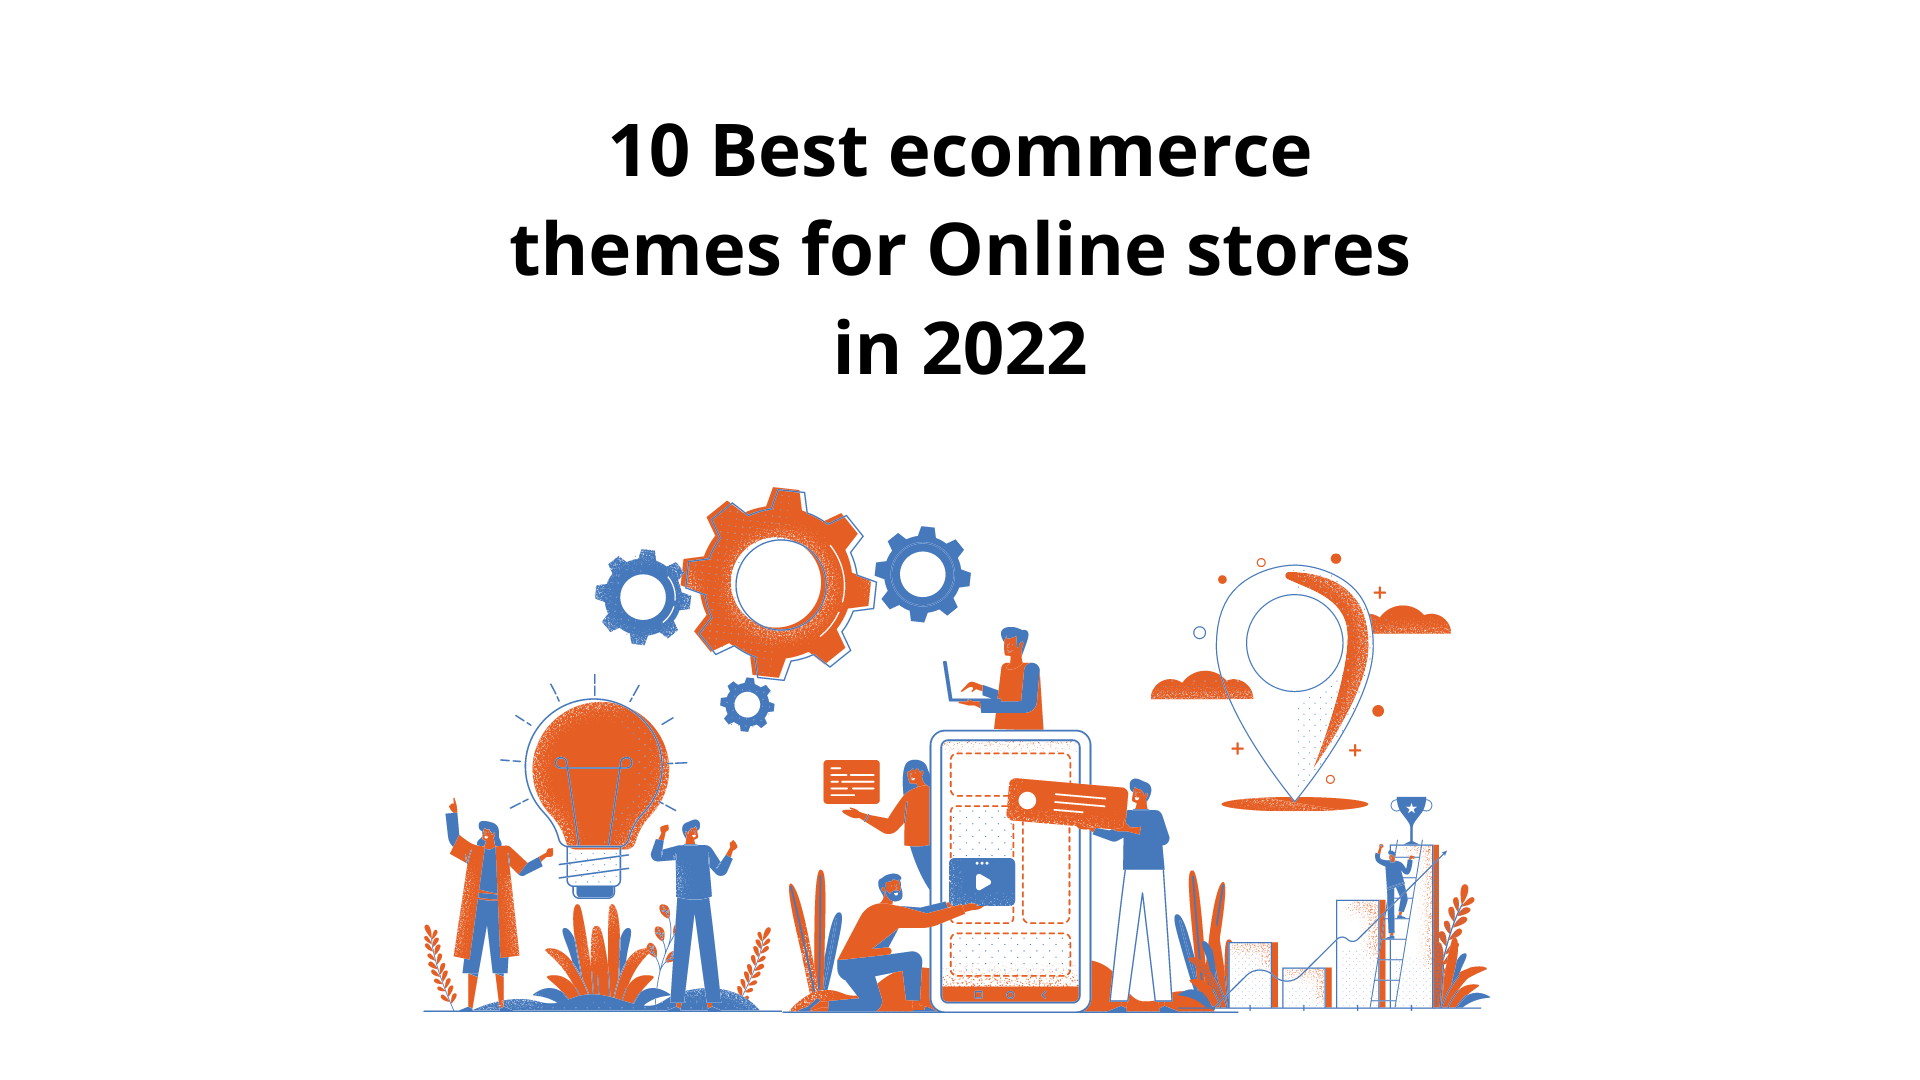 10 Best ecommerce themes for Online stores in 2022